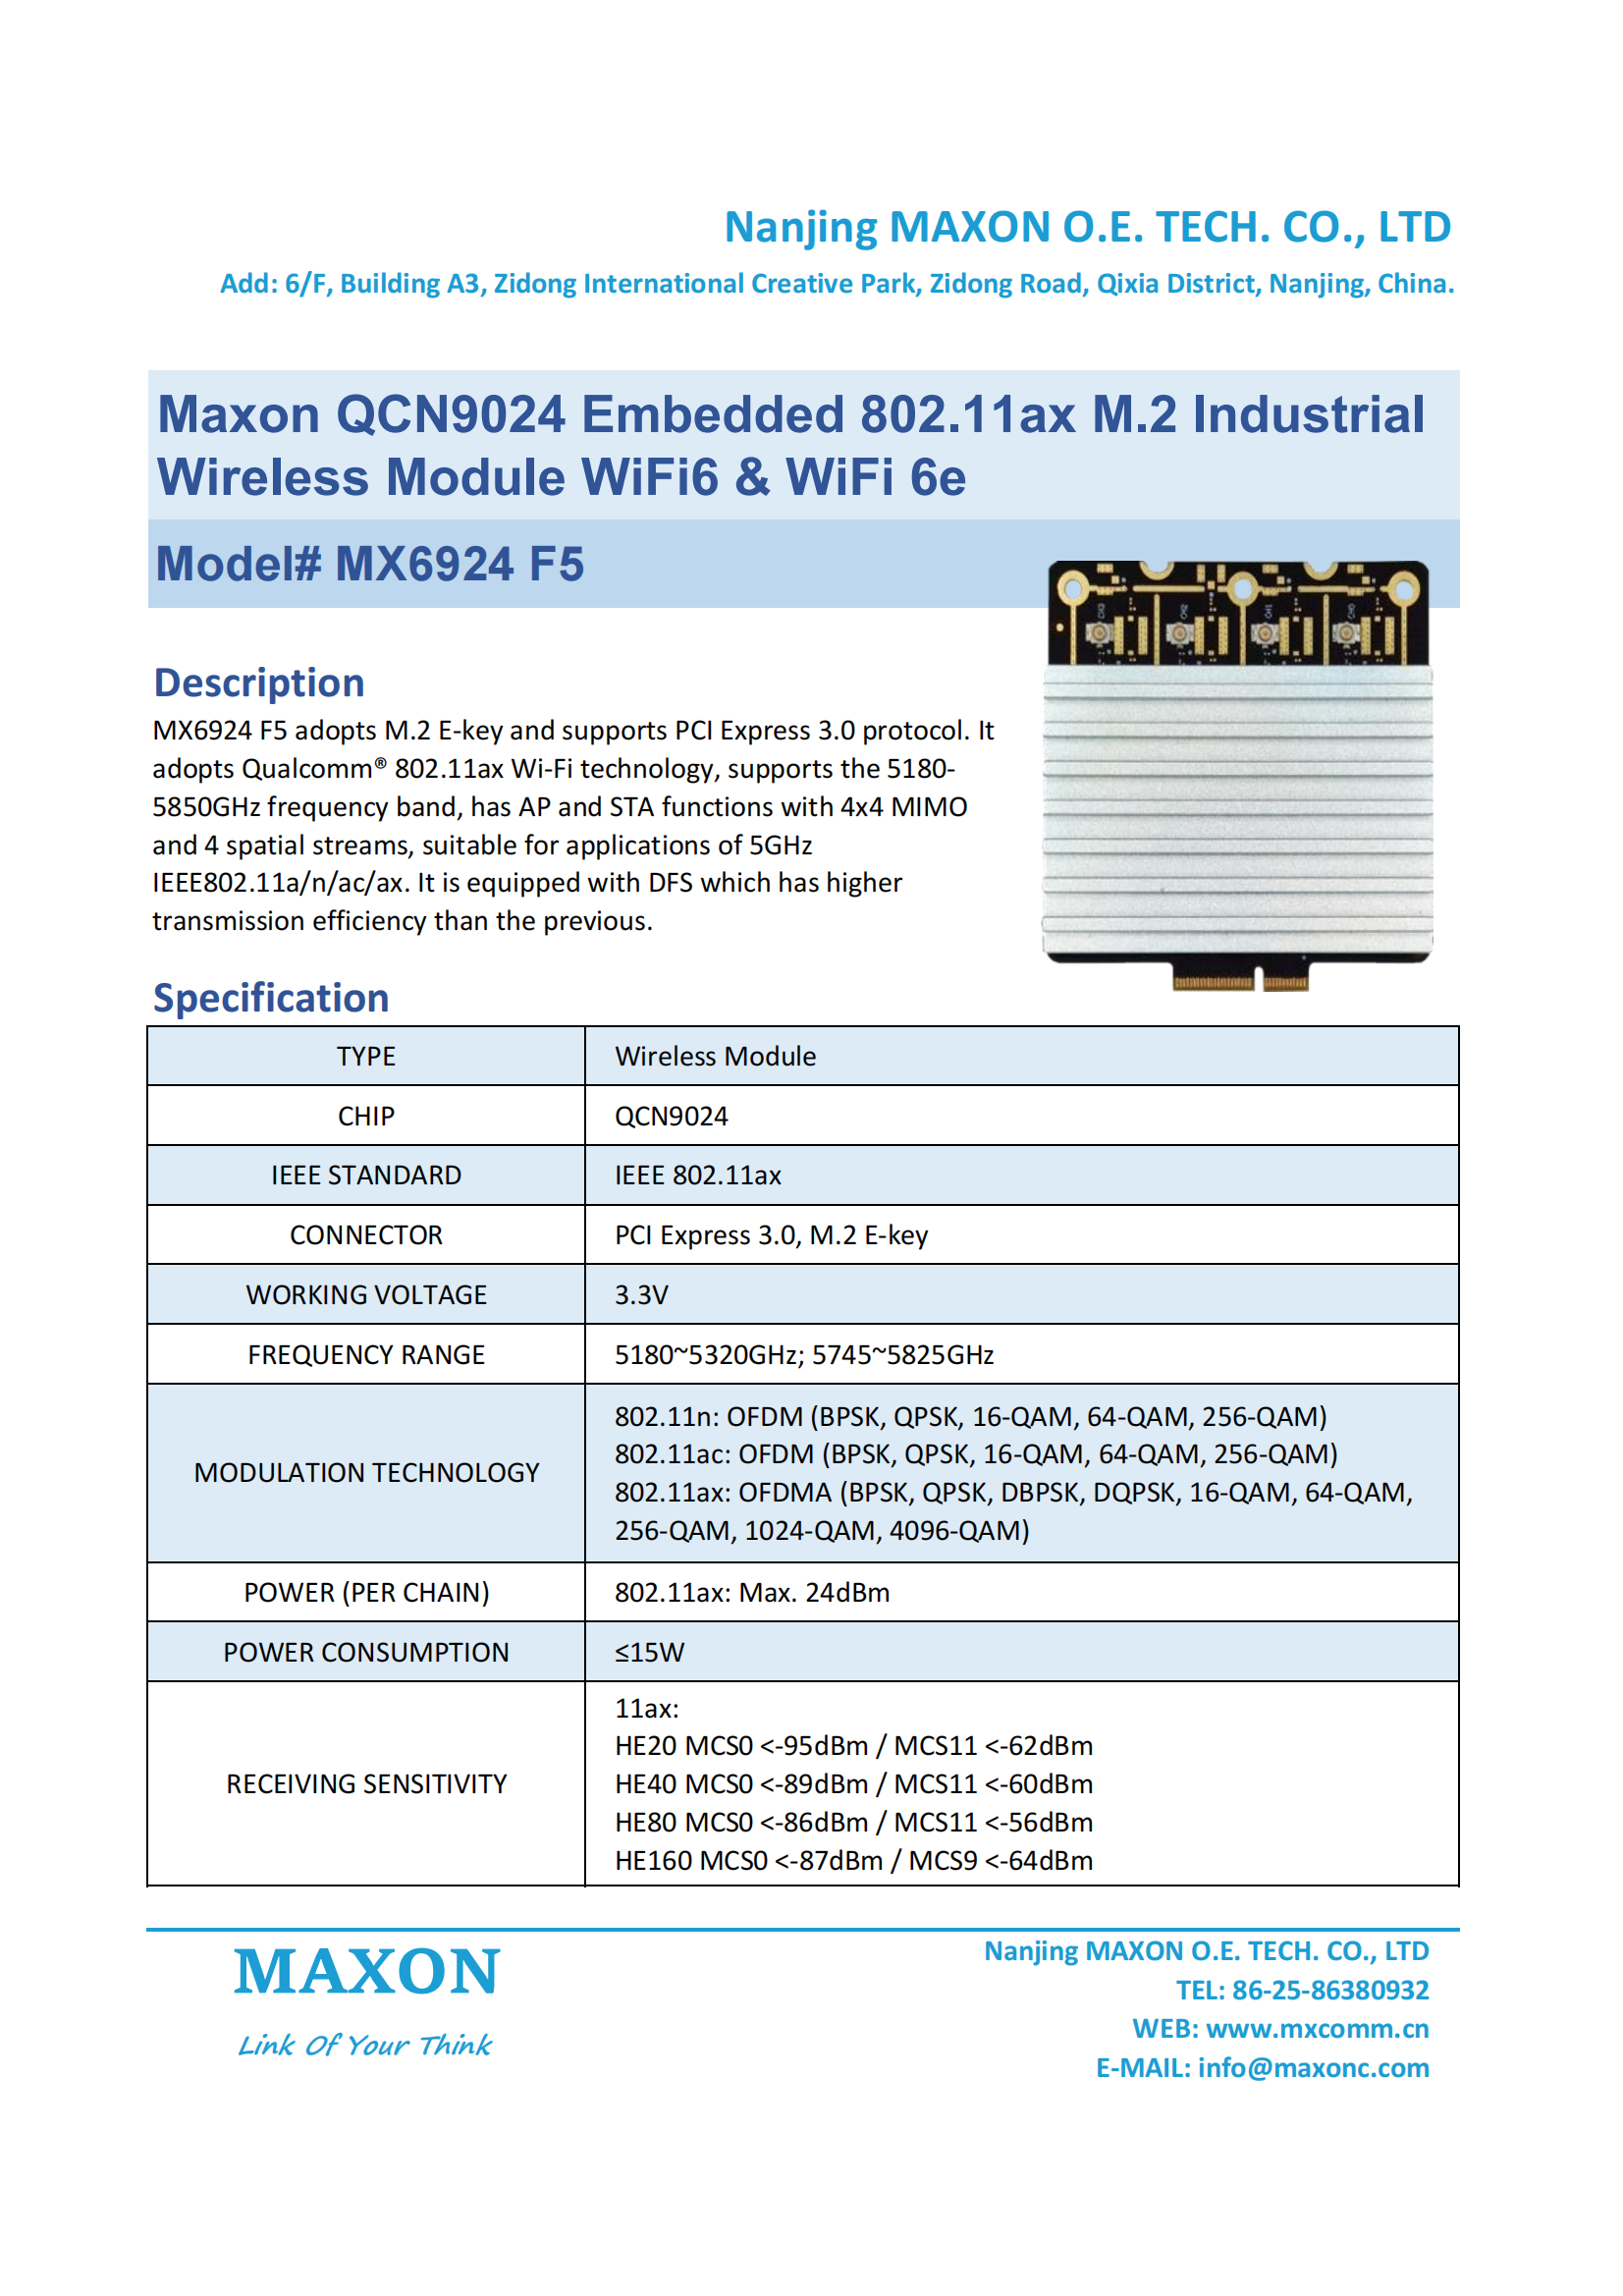 Difference between Maxon WiFi6 4×4 M.2 Wireless Module with QCN9074 & QCN9024?